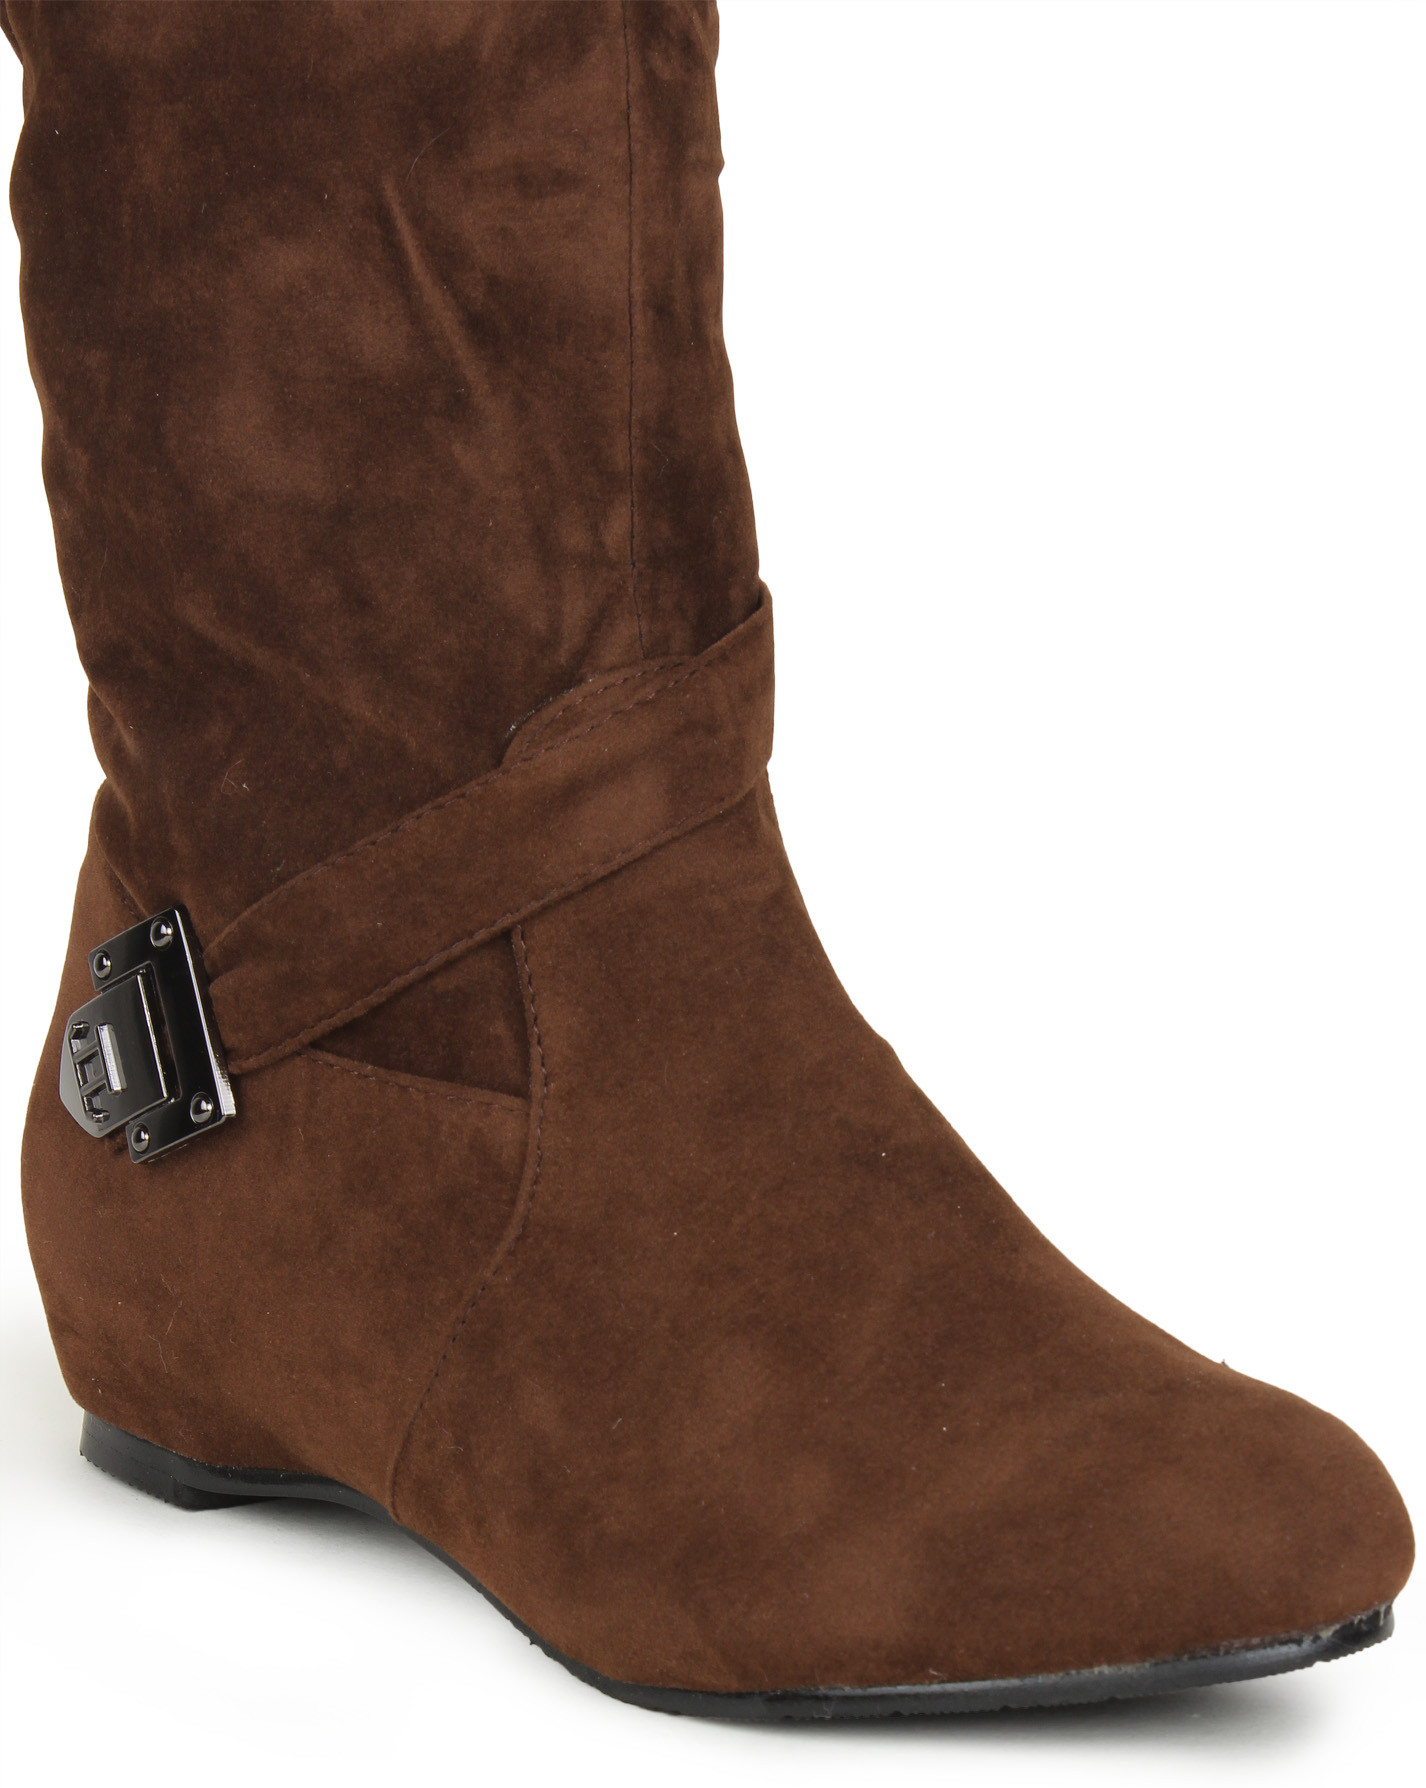 Stylistry Maxis Shde6603brwoboot3104 Boots